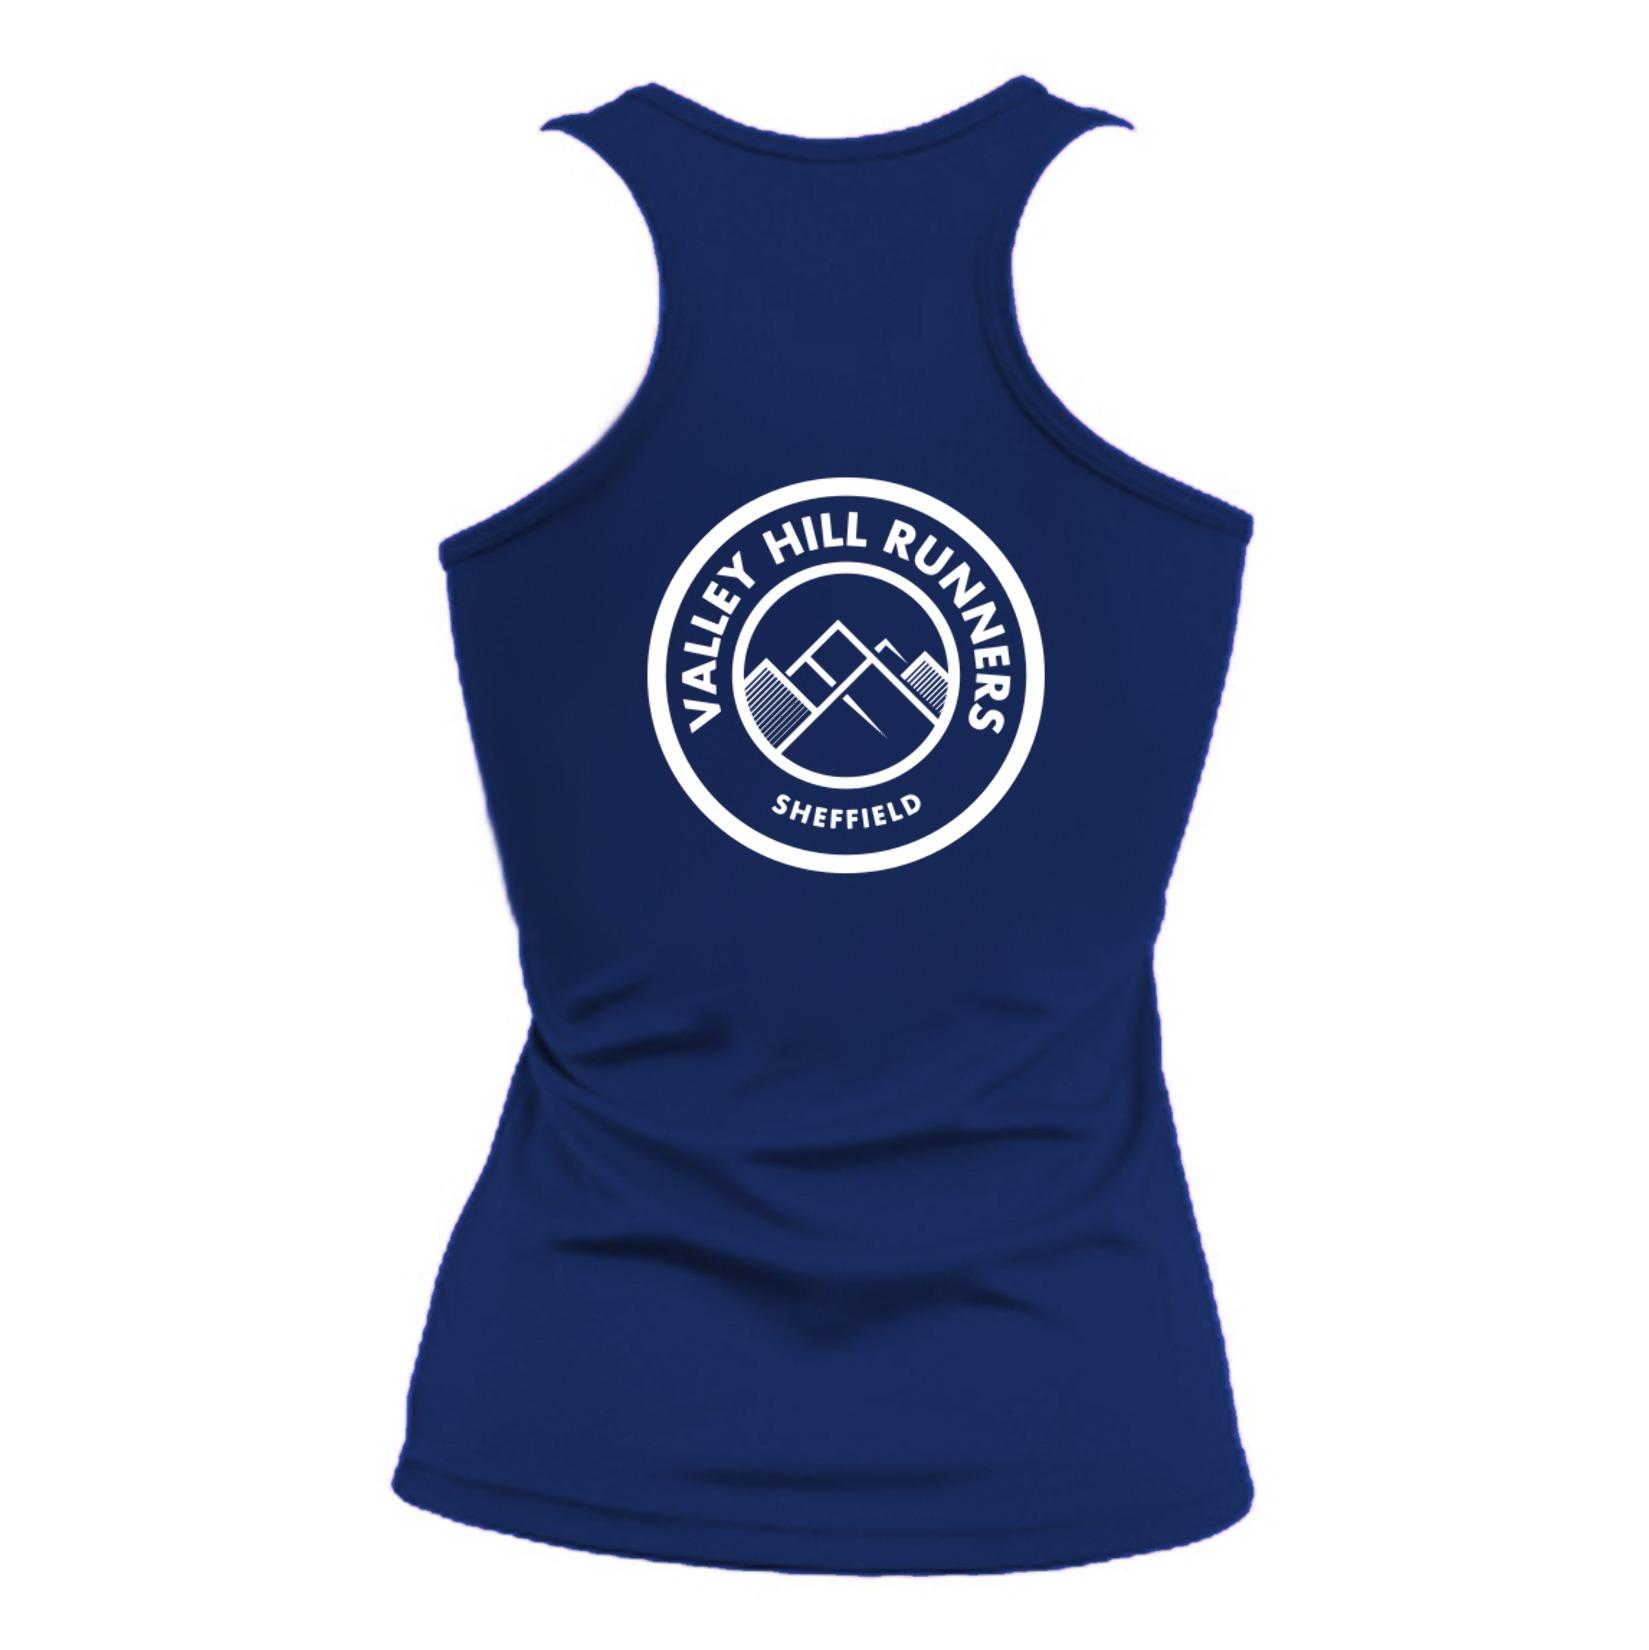 AWD Womens Just Cool Women's Performance Vest